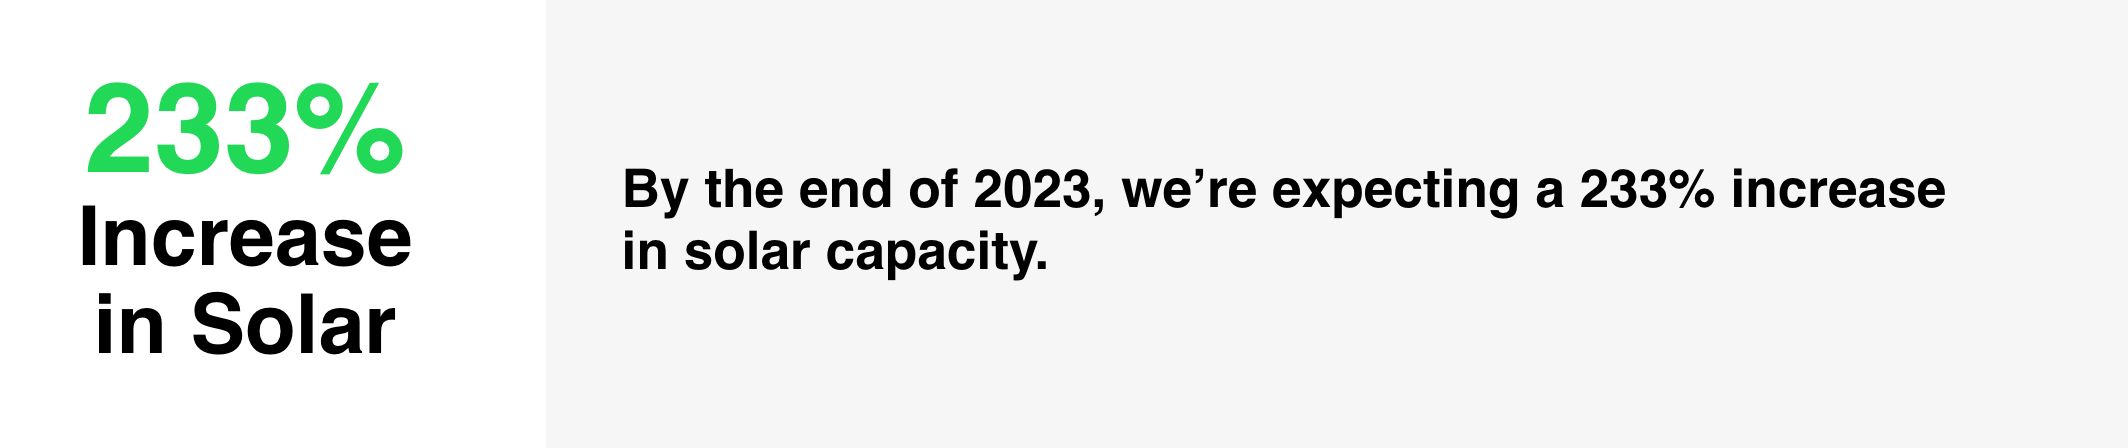 By the end of 2023, we're expecting a 233% increase in solar capacity